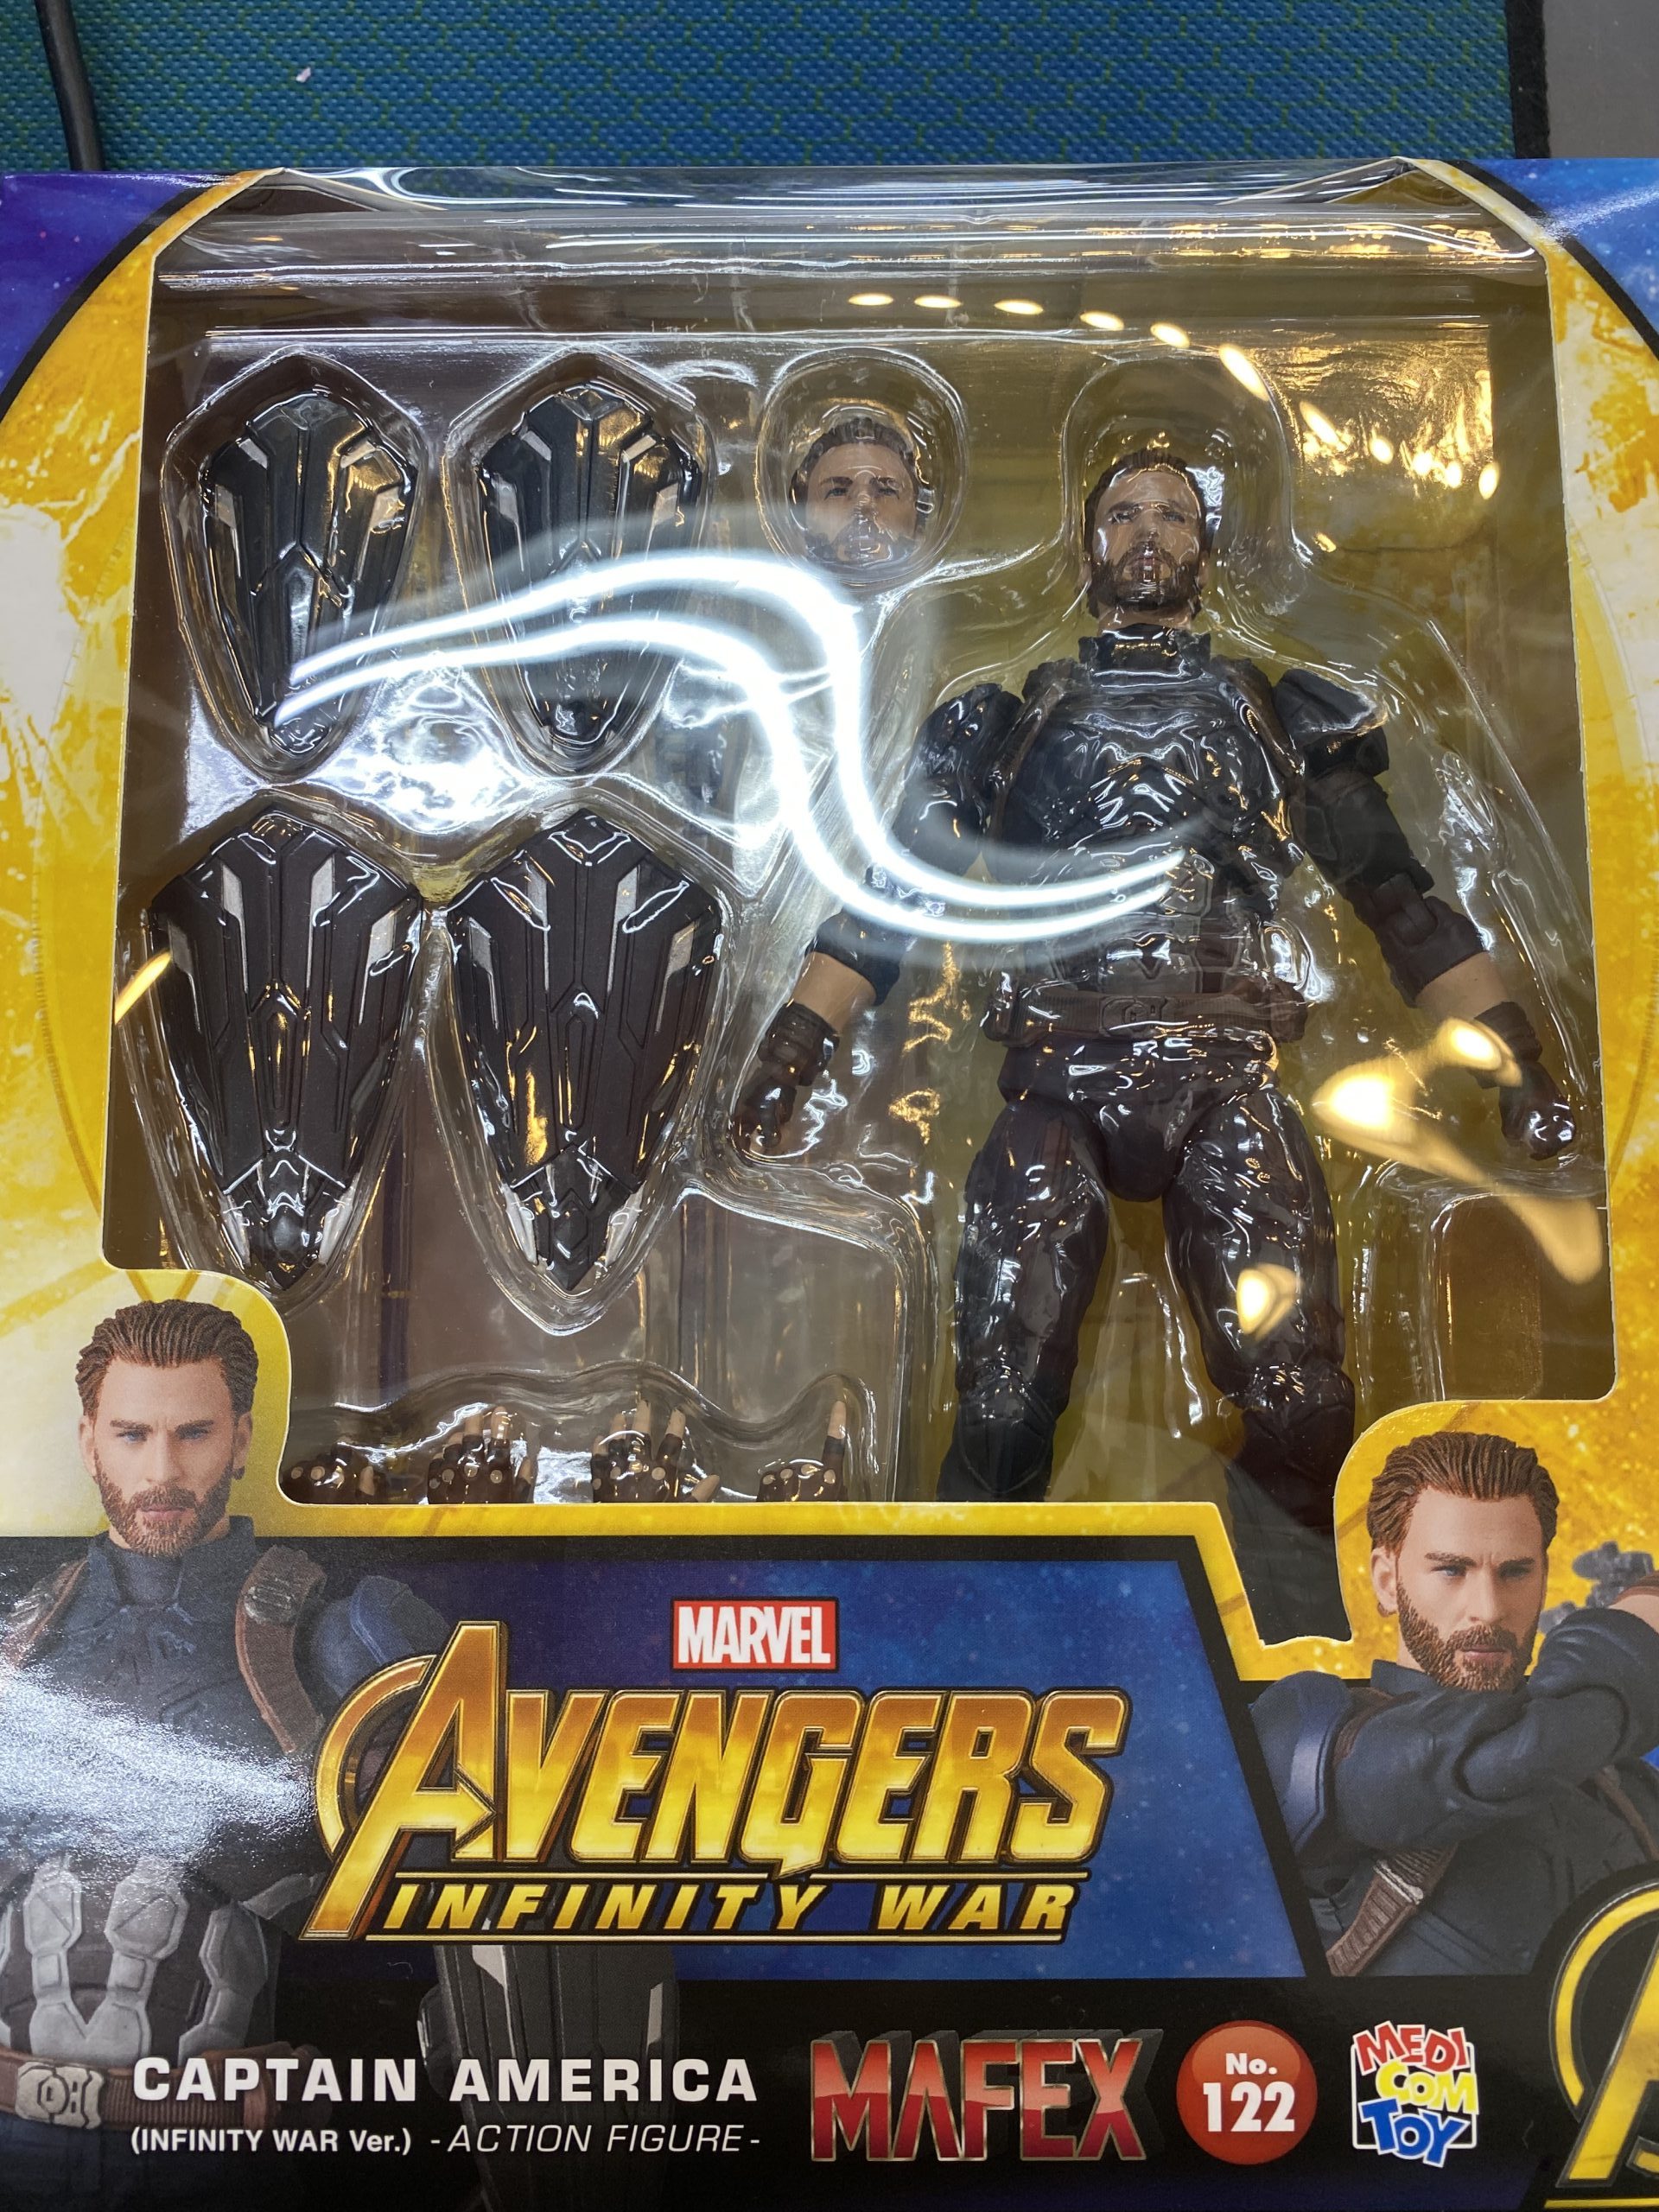 MAFEX キャプテン アメリカ　INFINITY WAR Ver.